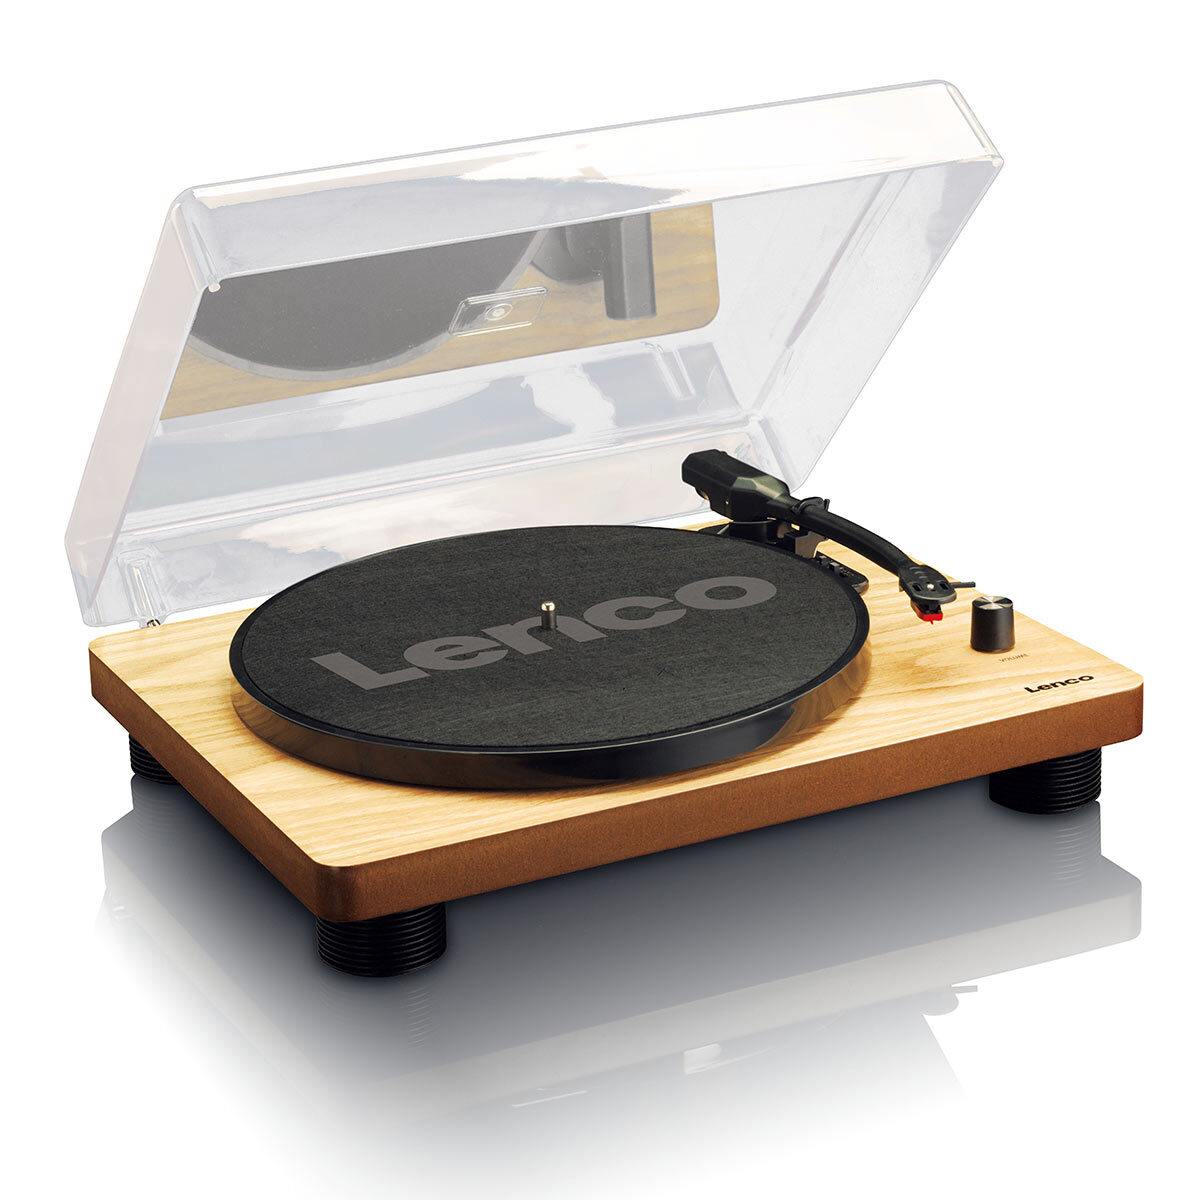 Lenco LS-50WD Turntable with Built-in Speakers, Ceramic Cartridge and USB Connection in Natural Wood